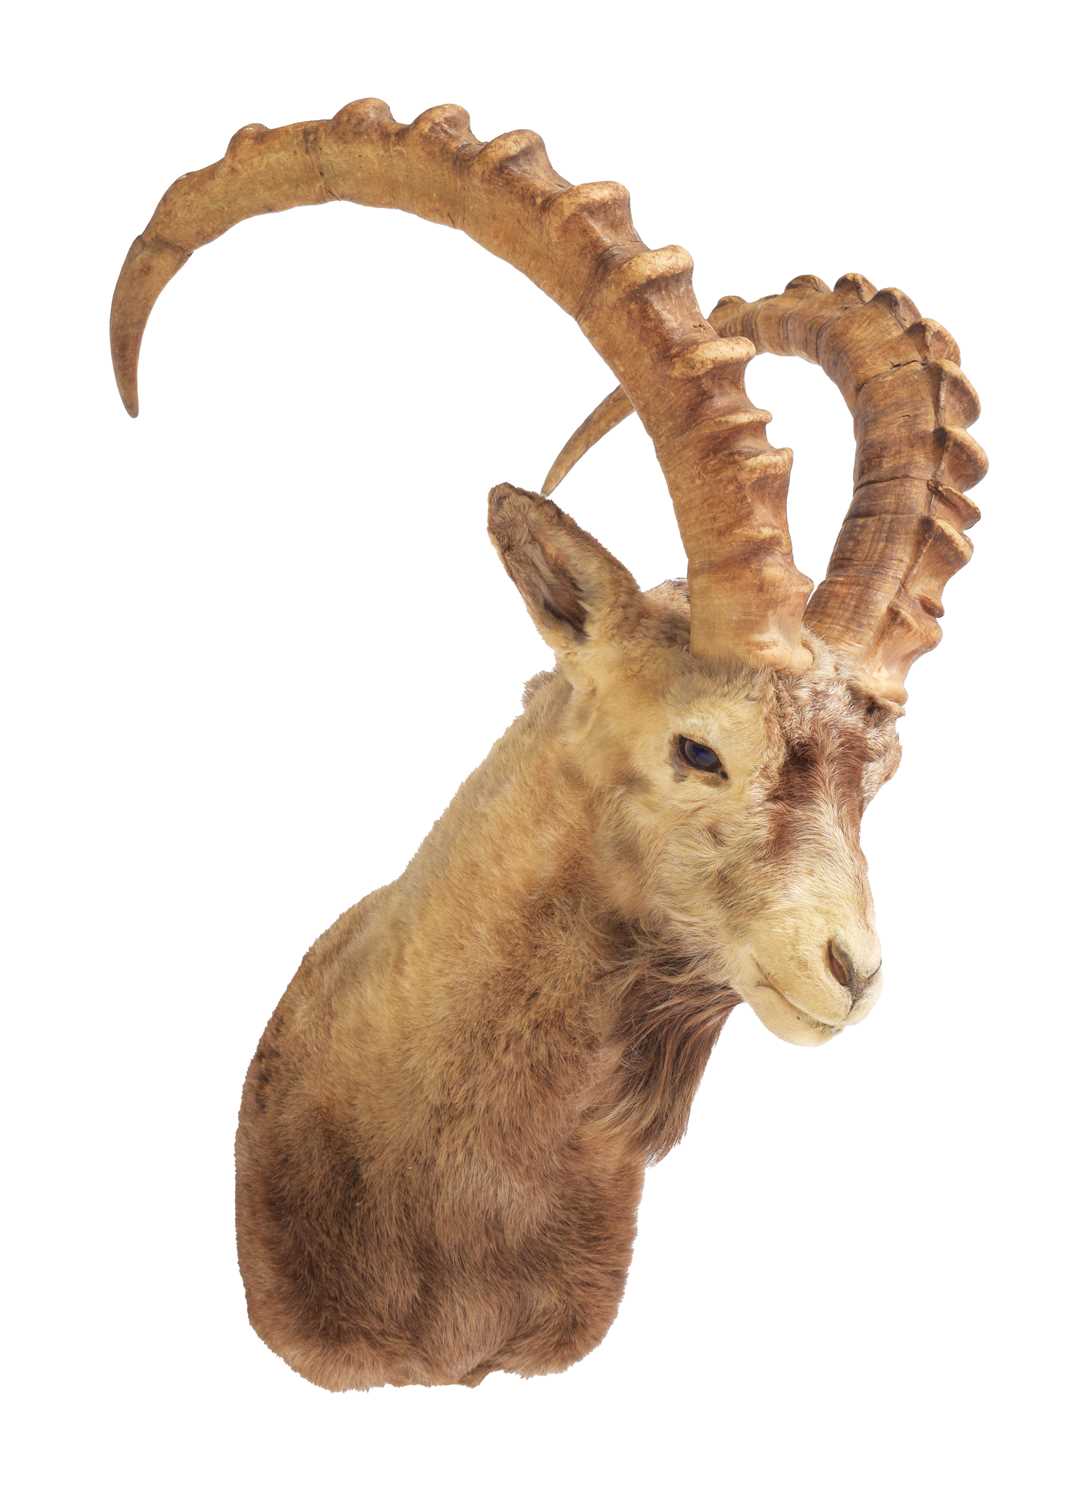 Taxidermy: Mid-Asian Ibex (Capra sibirica sibirica), mid-late 20th century, a high quality adult